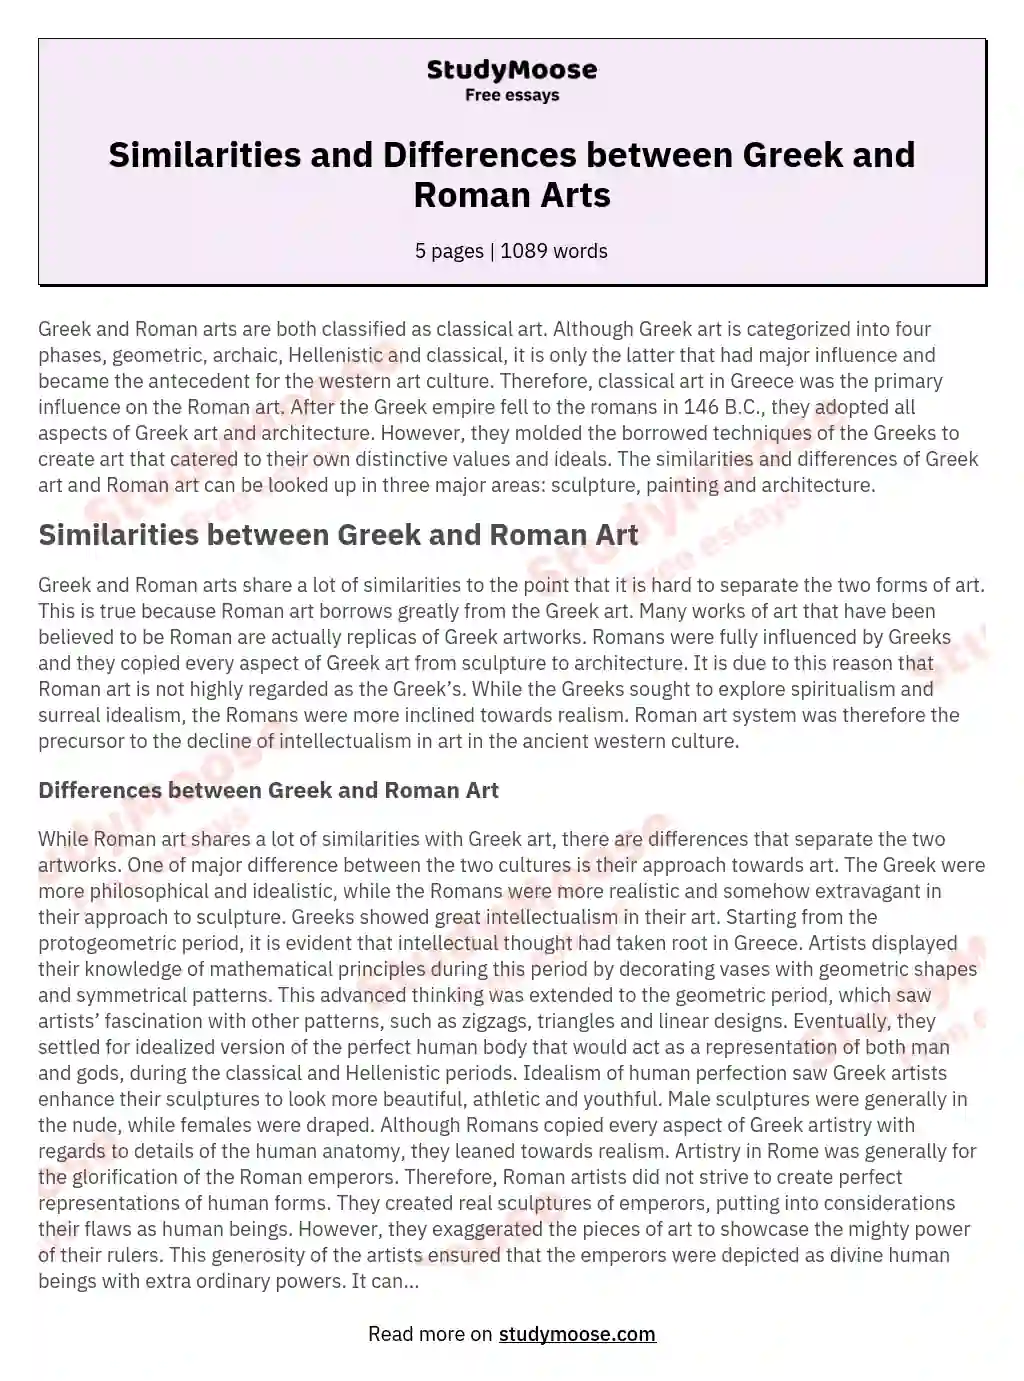 Similarities and Differences between Greek and Roman Arts essay